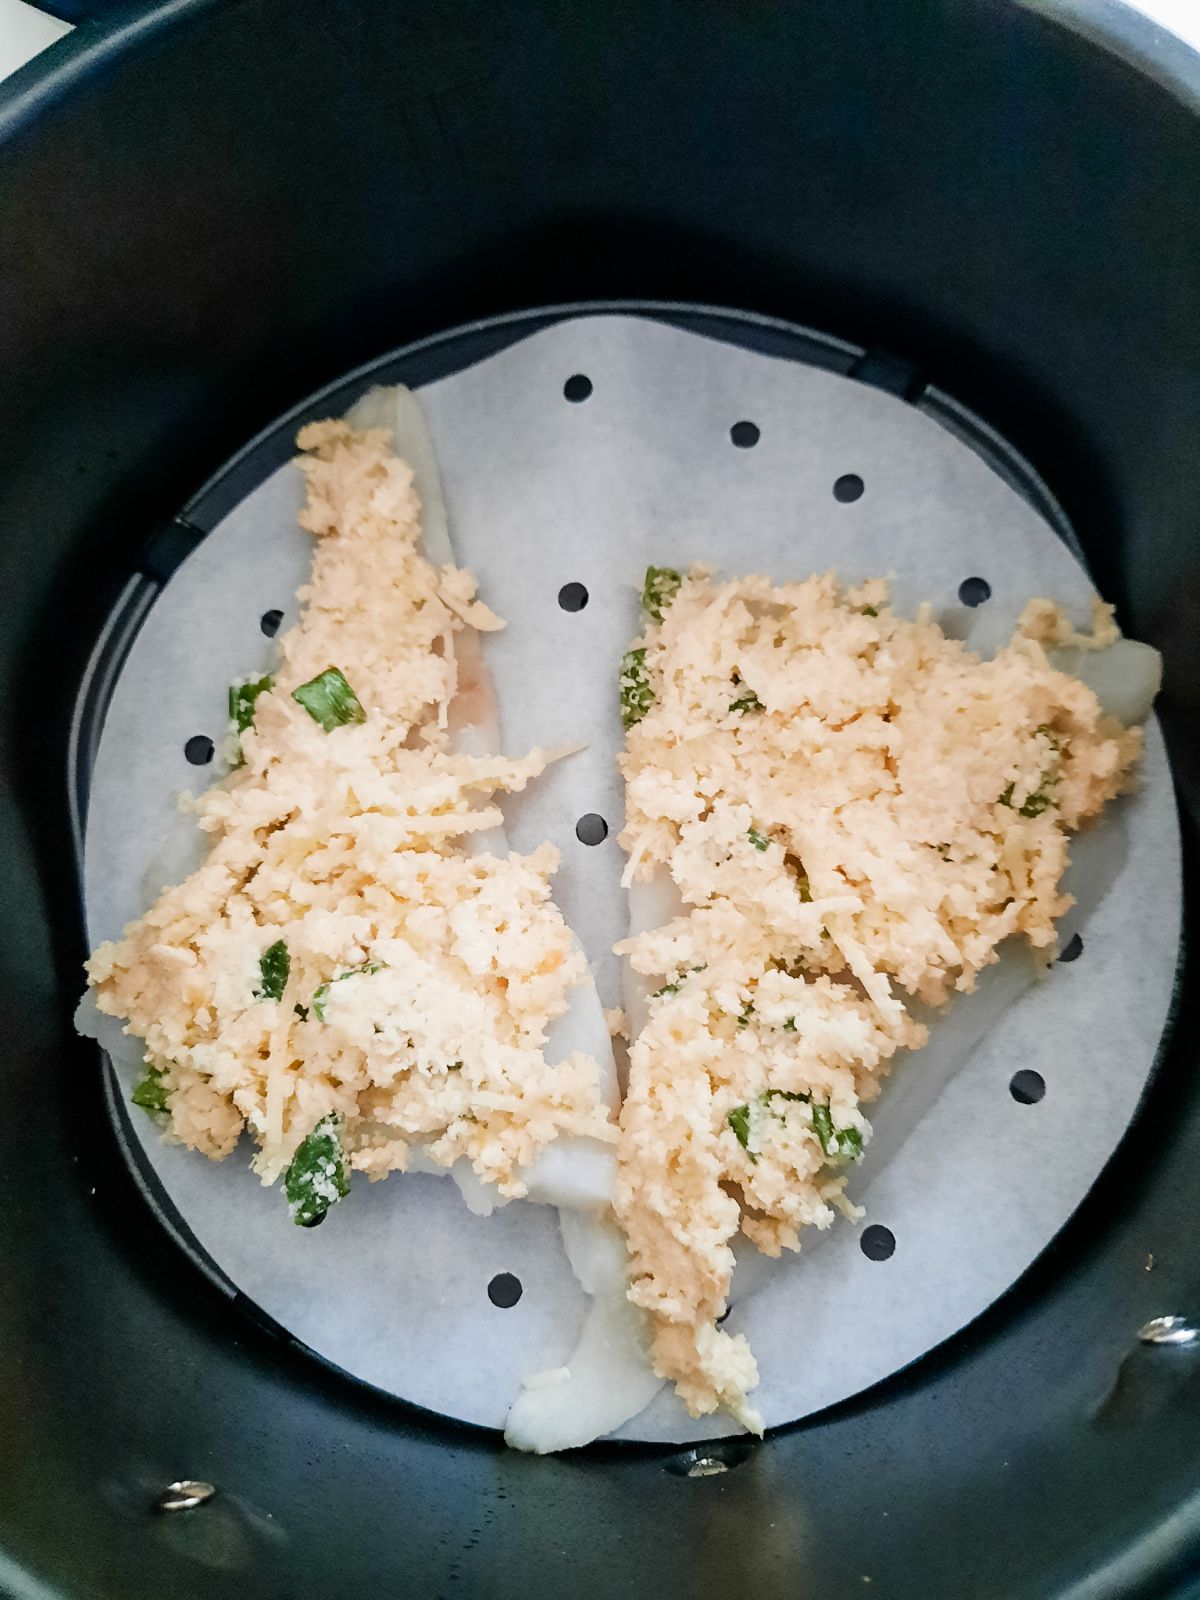 Coated cod pieces in an air fryer.